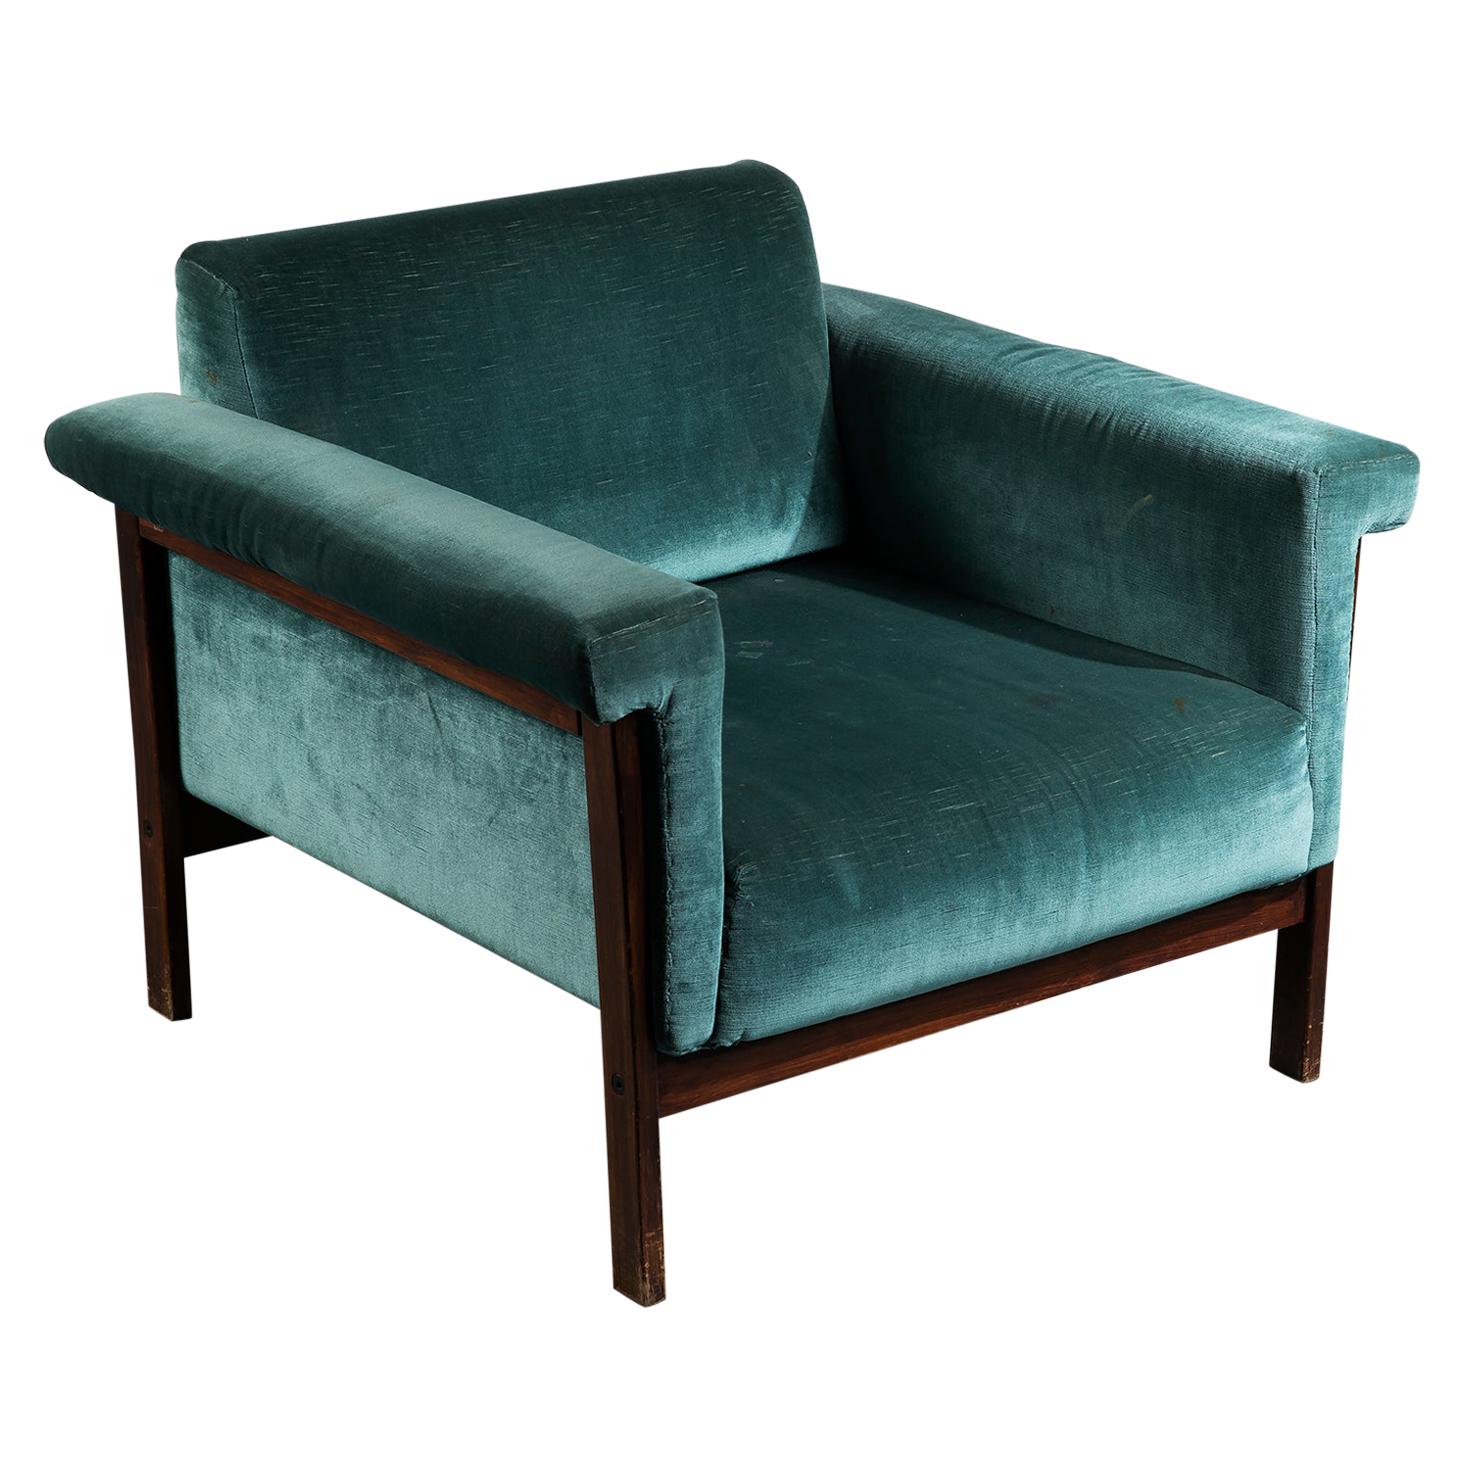 Ettore Sottsass Rosewood and Teal Fabric 'Canada' Armchair for Poltronova, 1958 For Sale